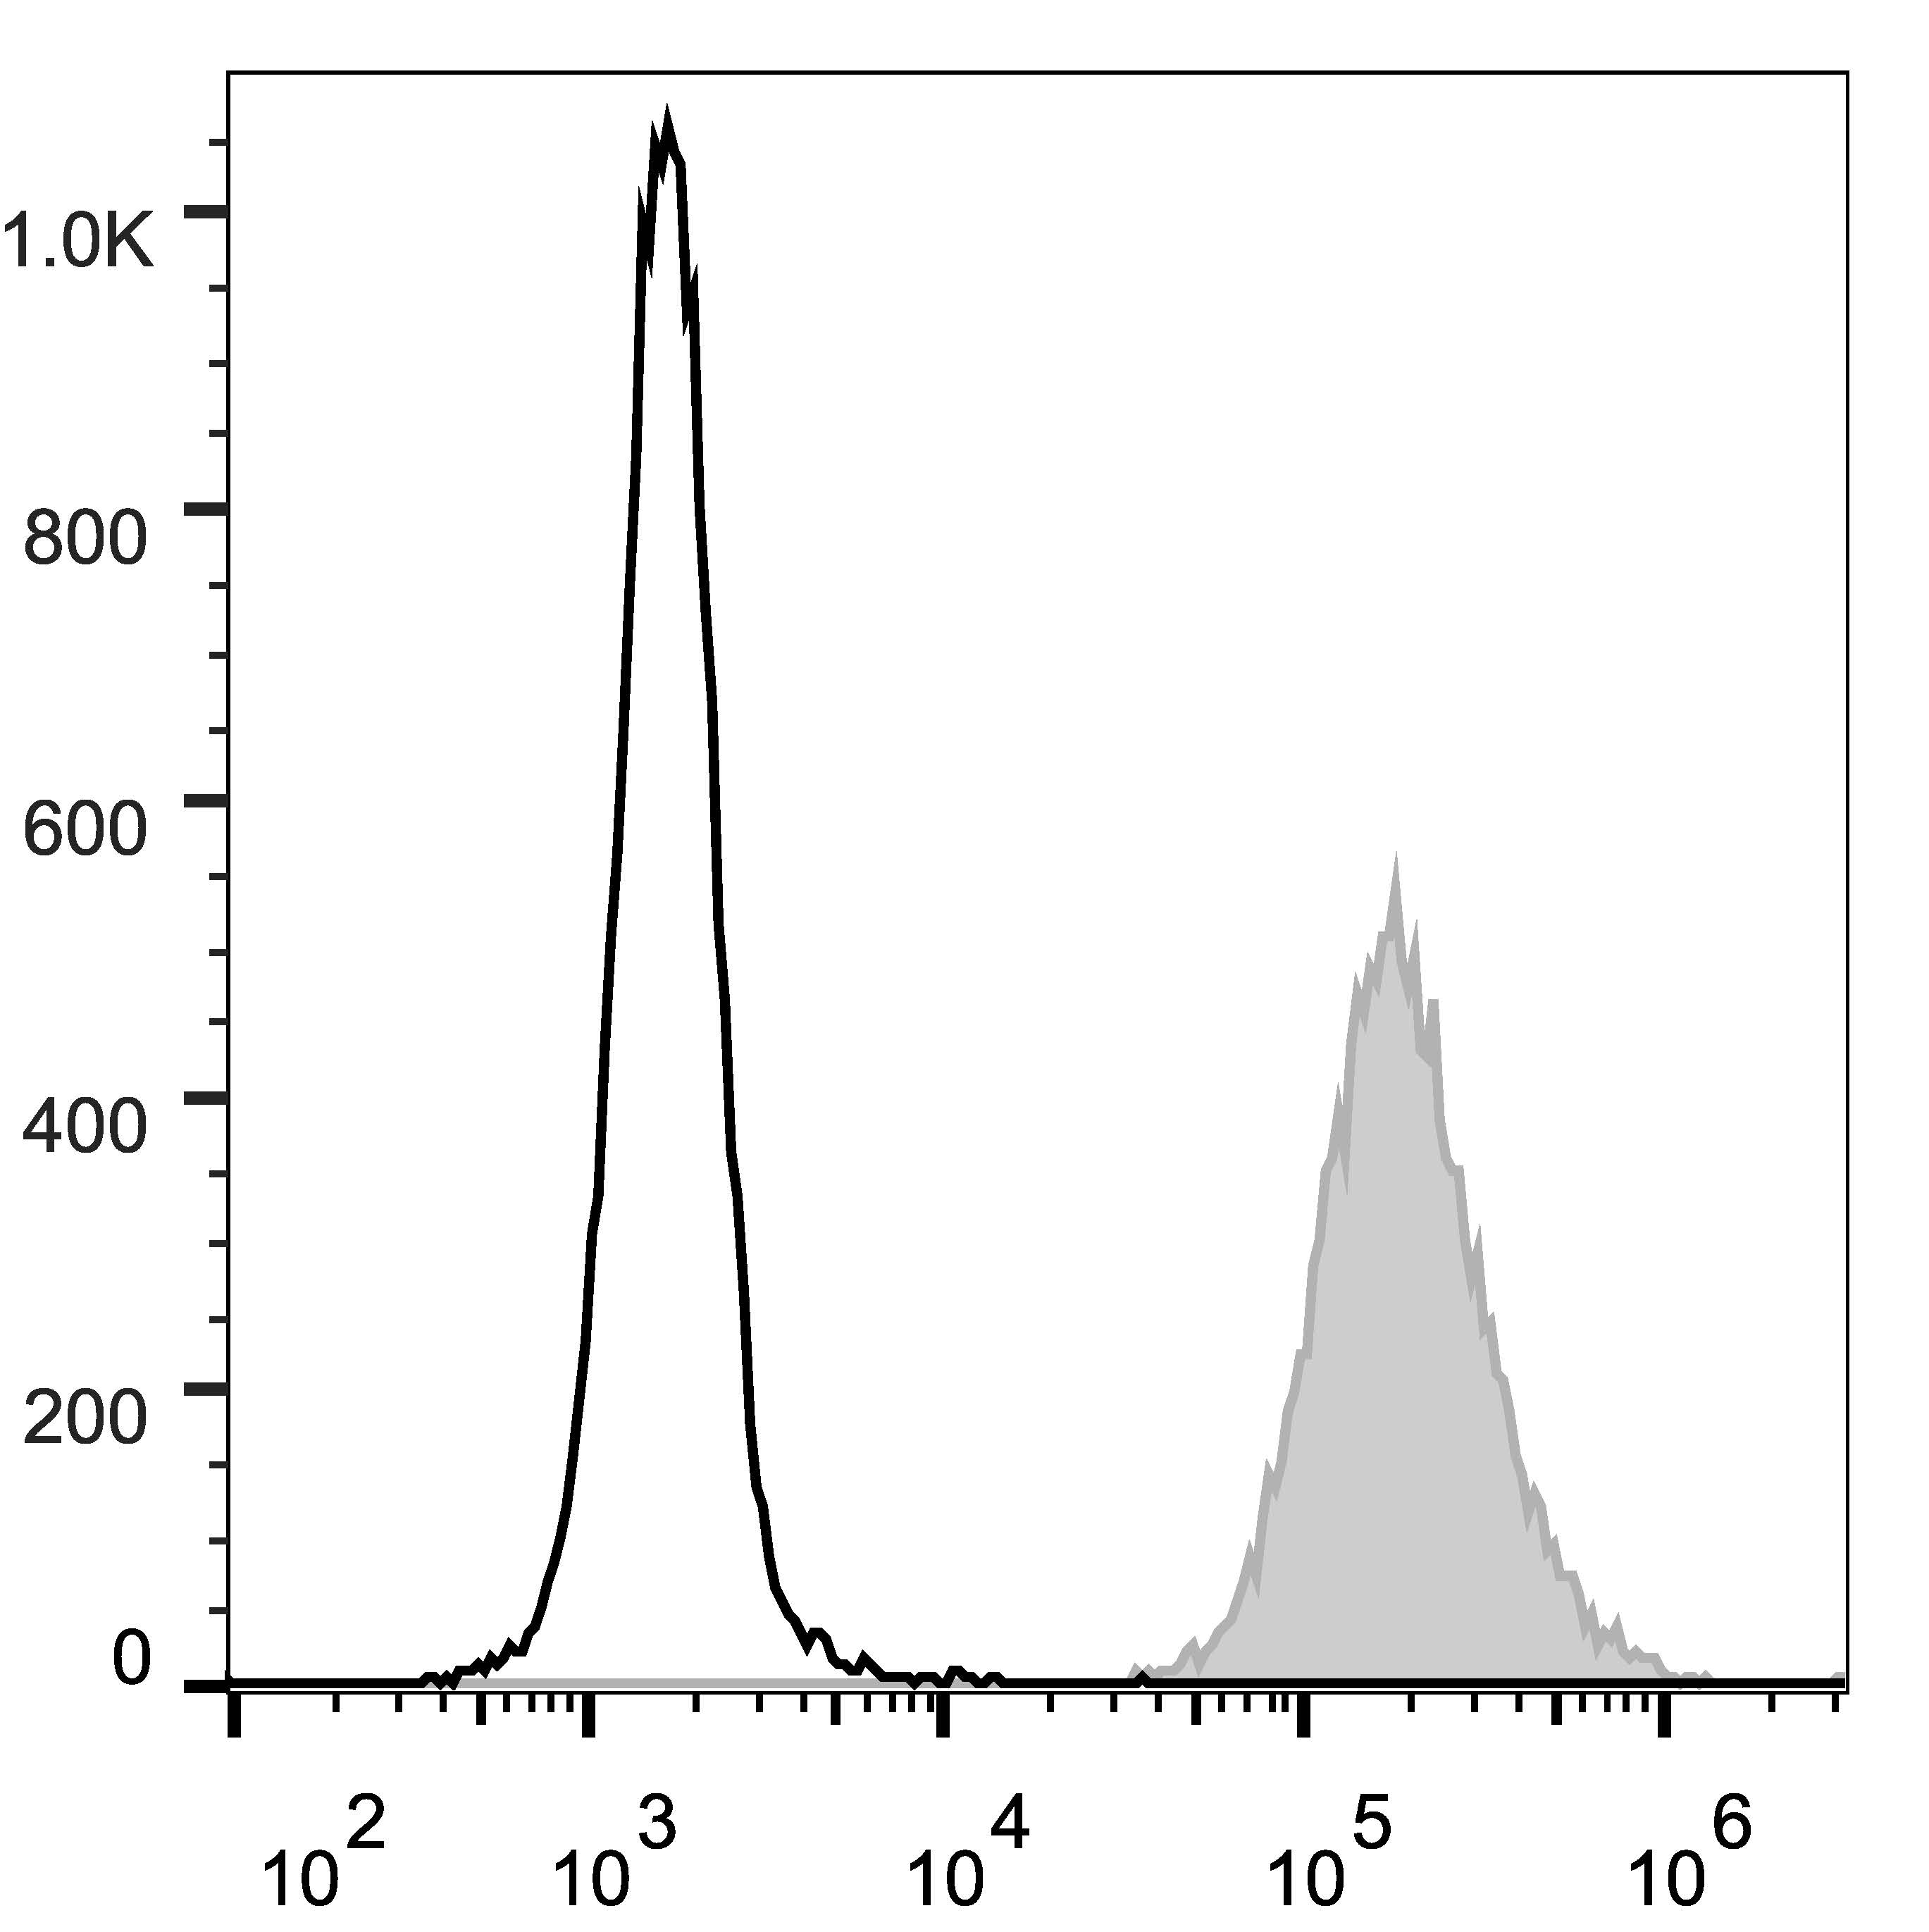 Human peripheral blood granulocytes are stained with Anti-Human CD15 Monoclonal Antibody(PerCP/Cyanine5.5 Conjugated)(filled gray histogram). Unstained granulocytes (empty black histogram) are used as control.